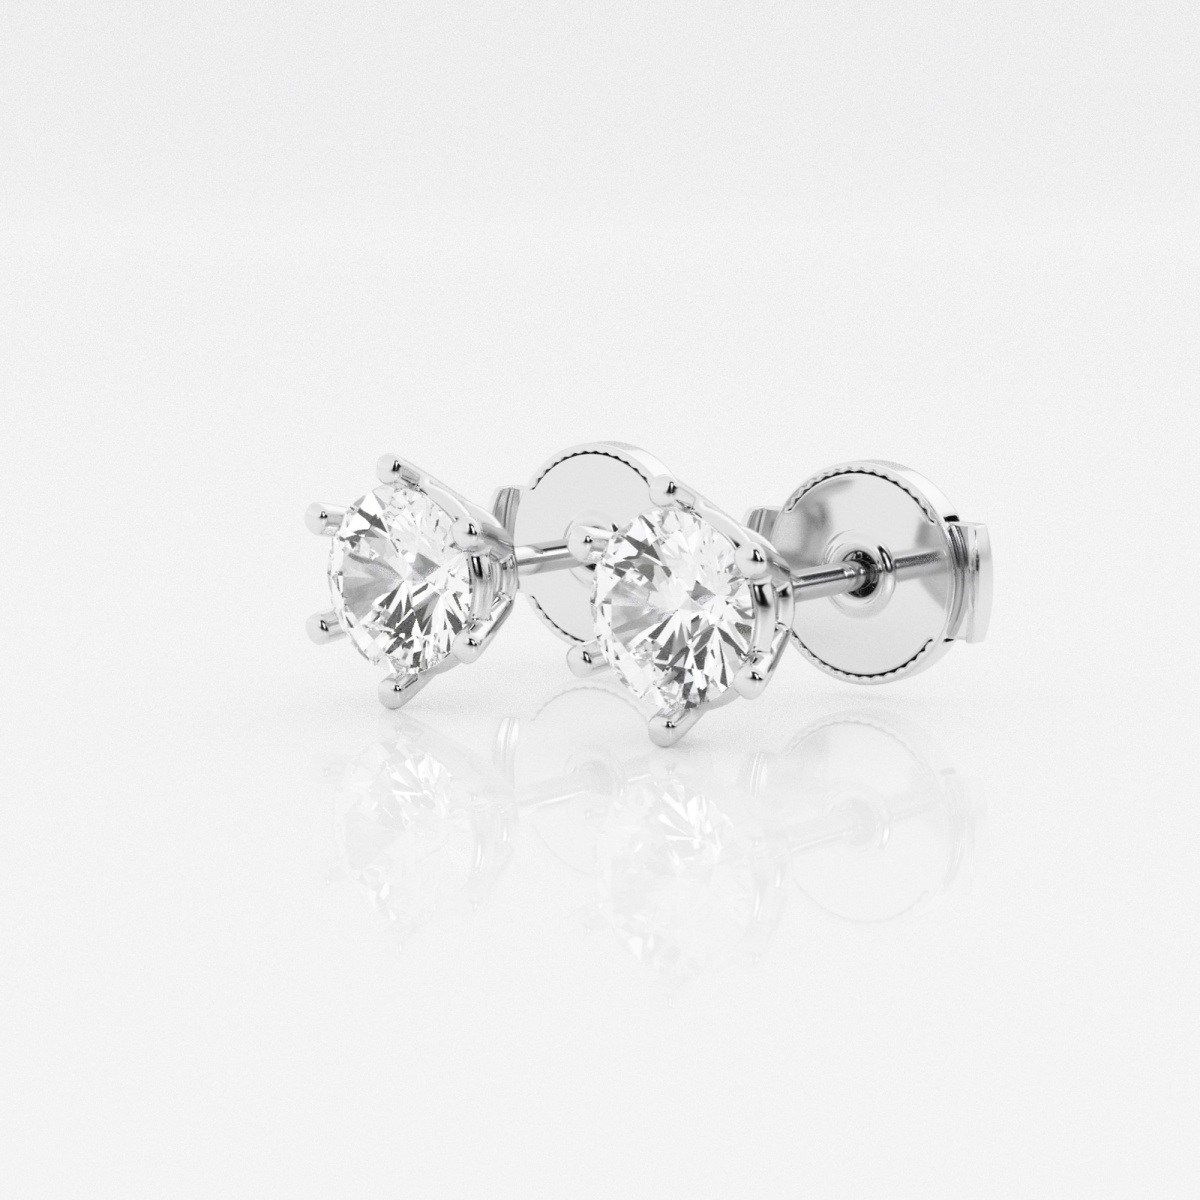 Additional Image 1 for  1 ctw Round Colorless Lab Grown Diamond Six Prong Stud Earrings